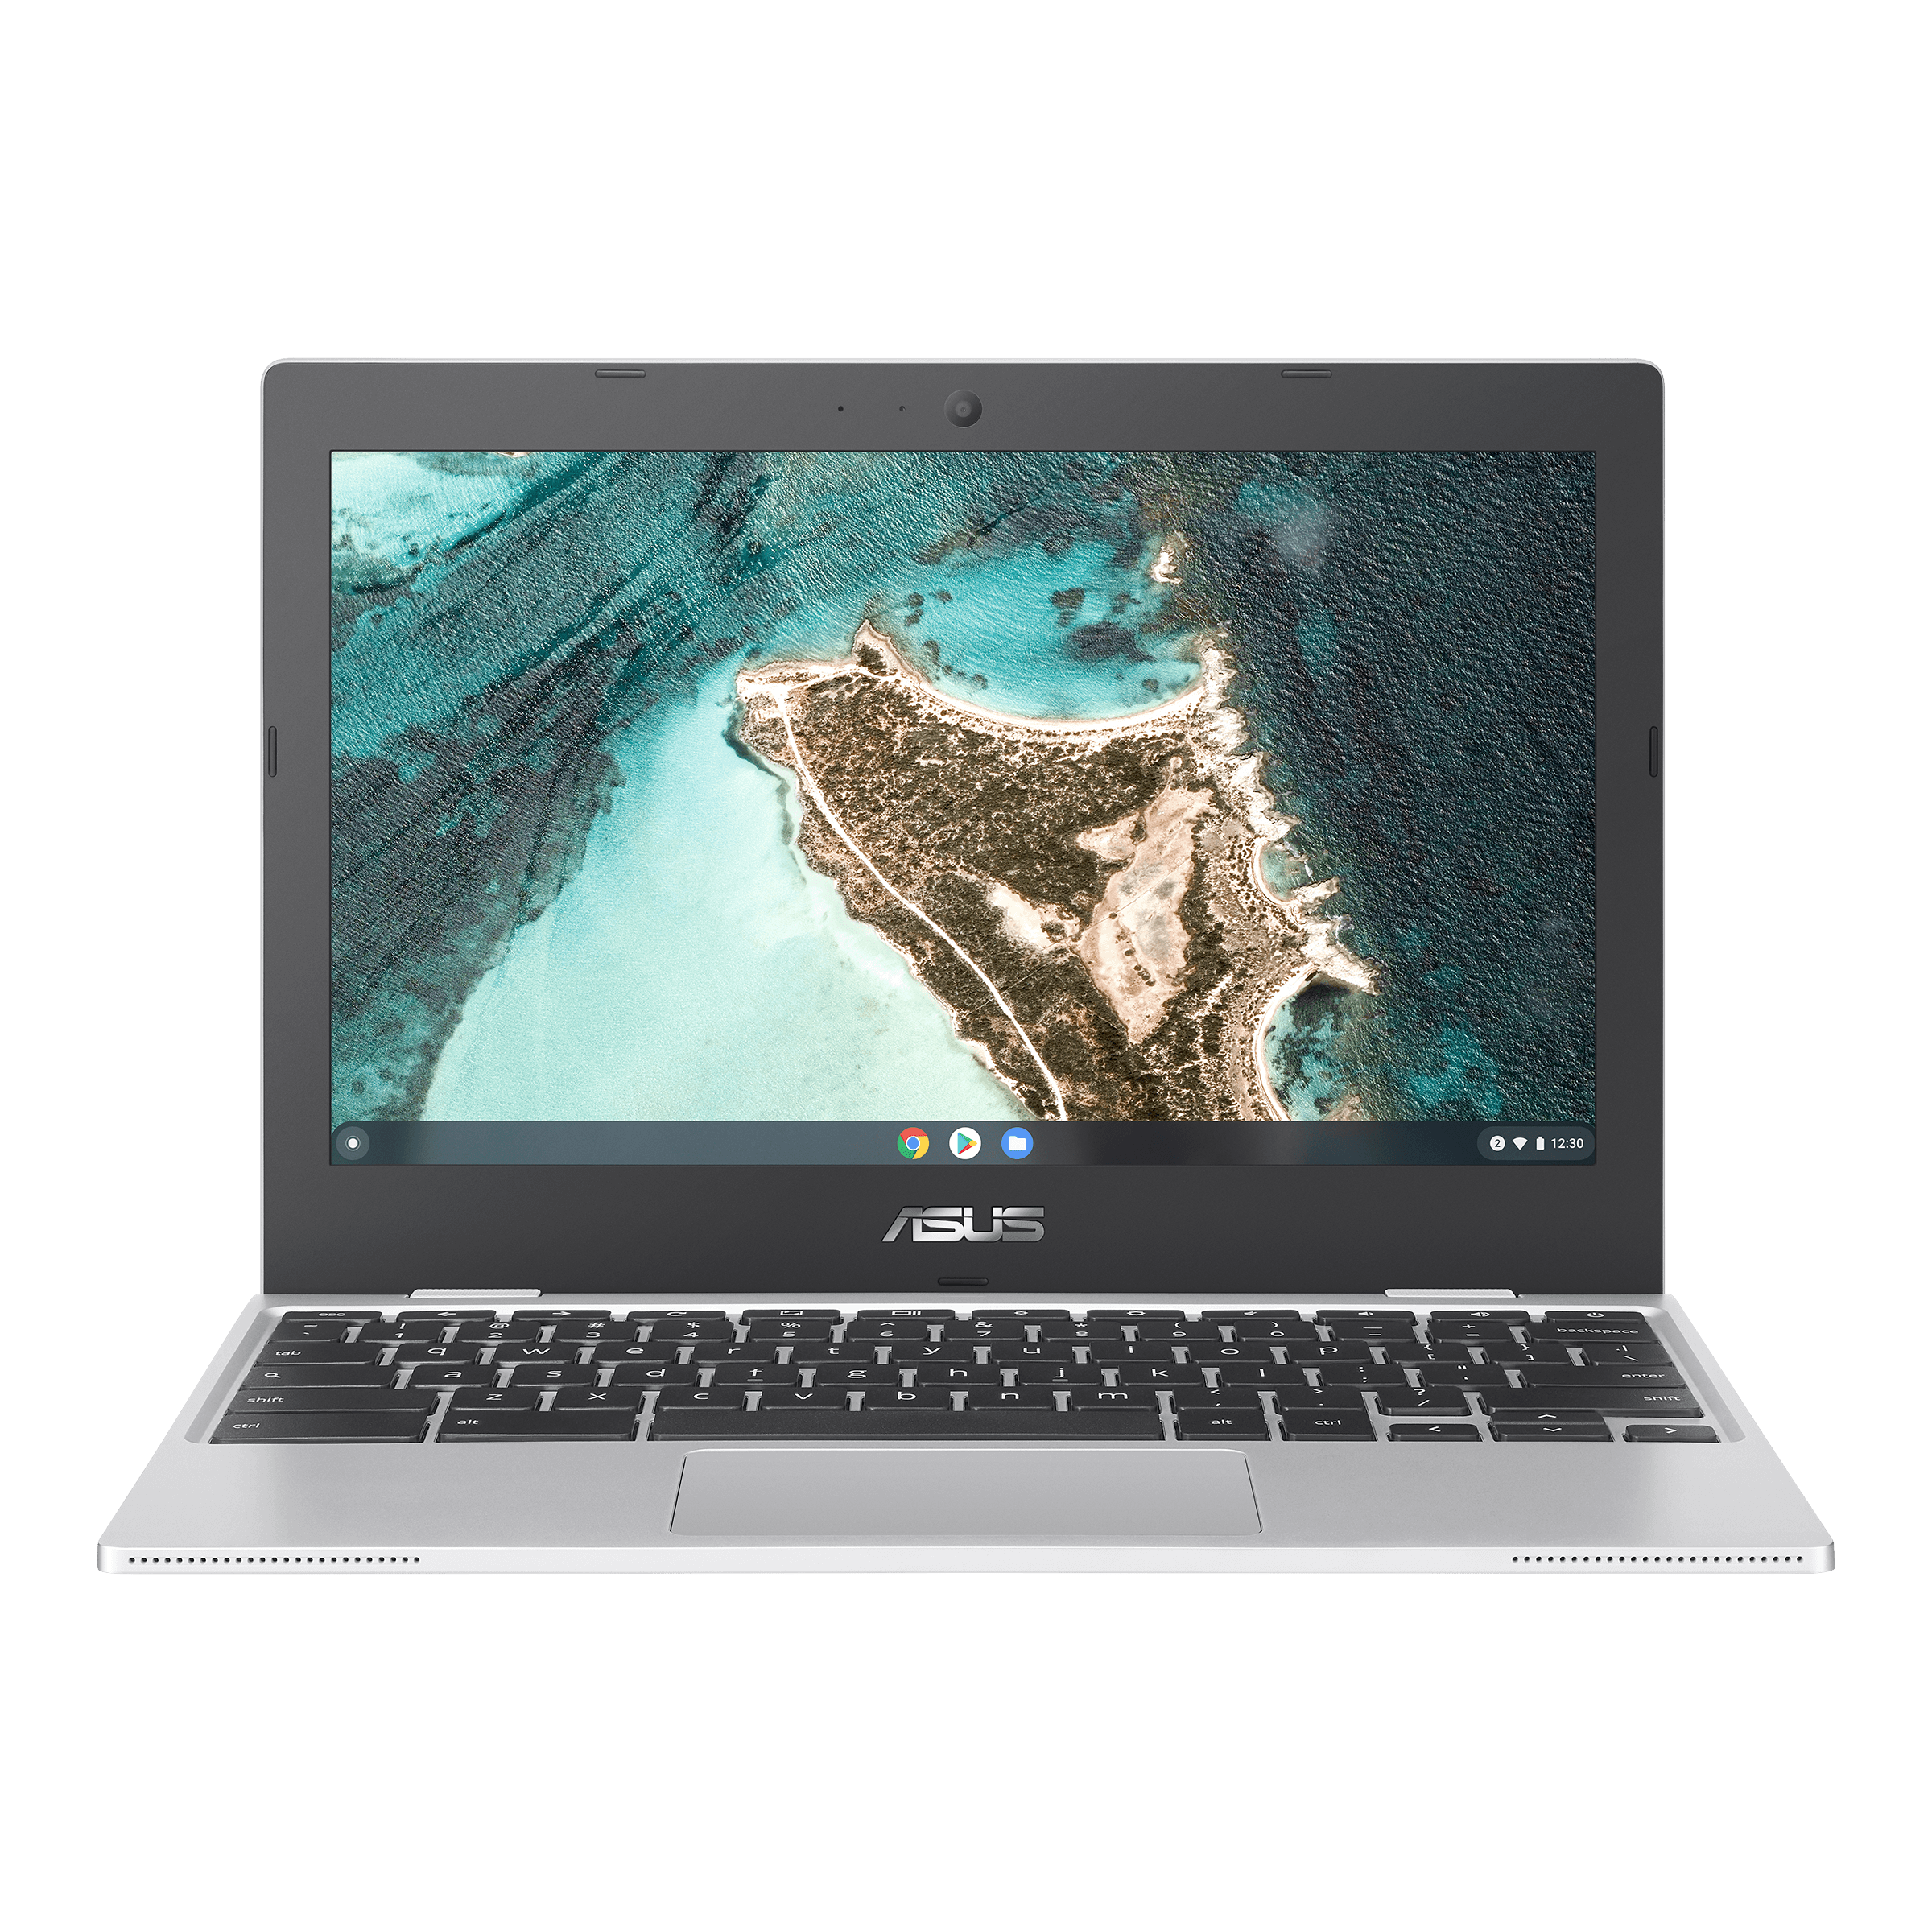 ASUS Chromebook CX1 (CX1100)｜Laptops For Home｜ASUS Canada